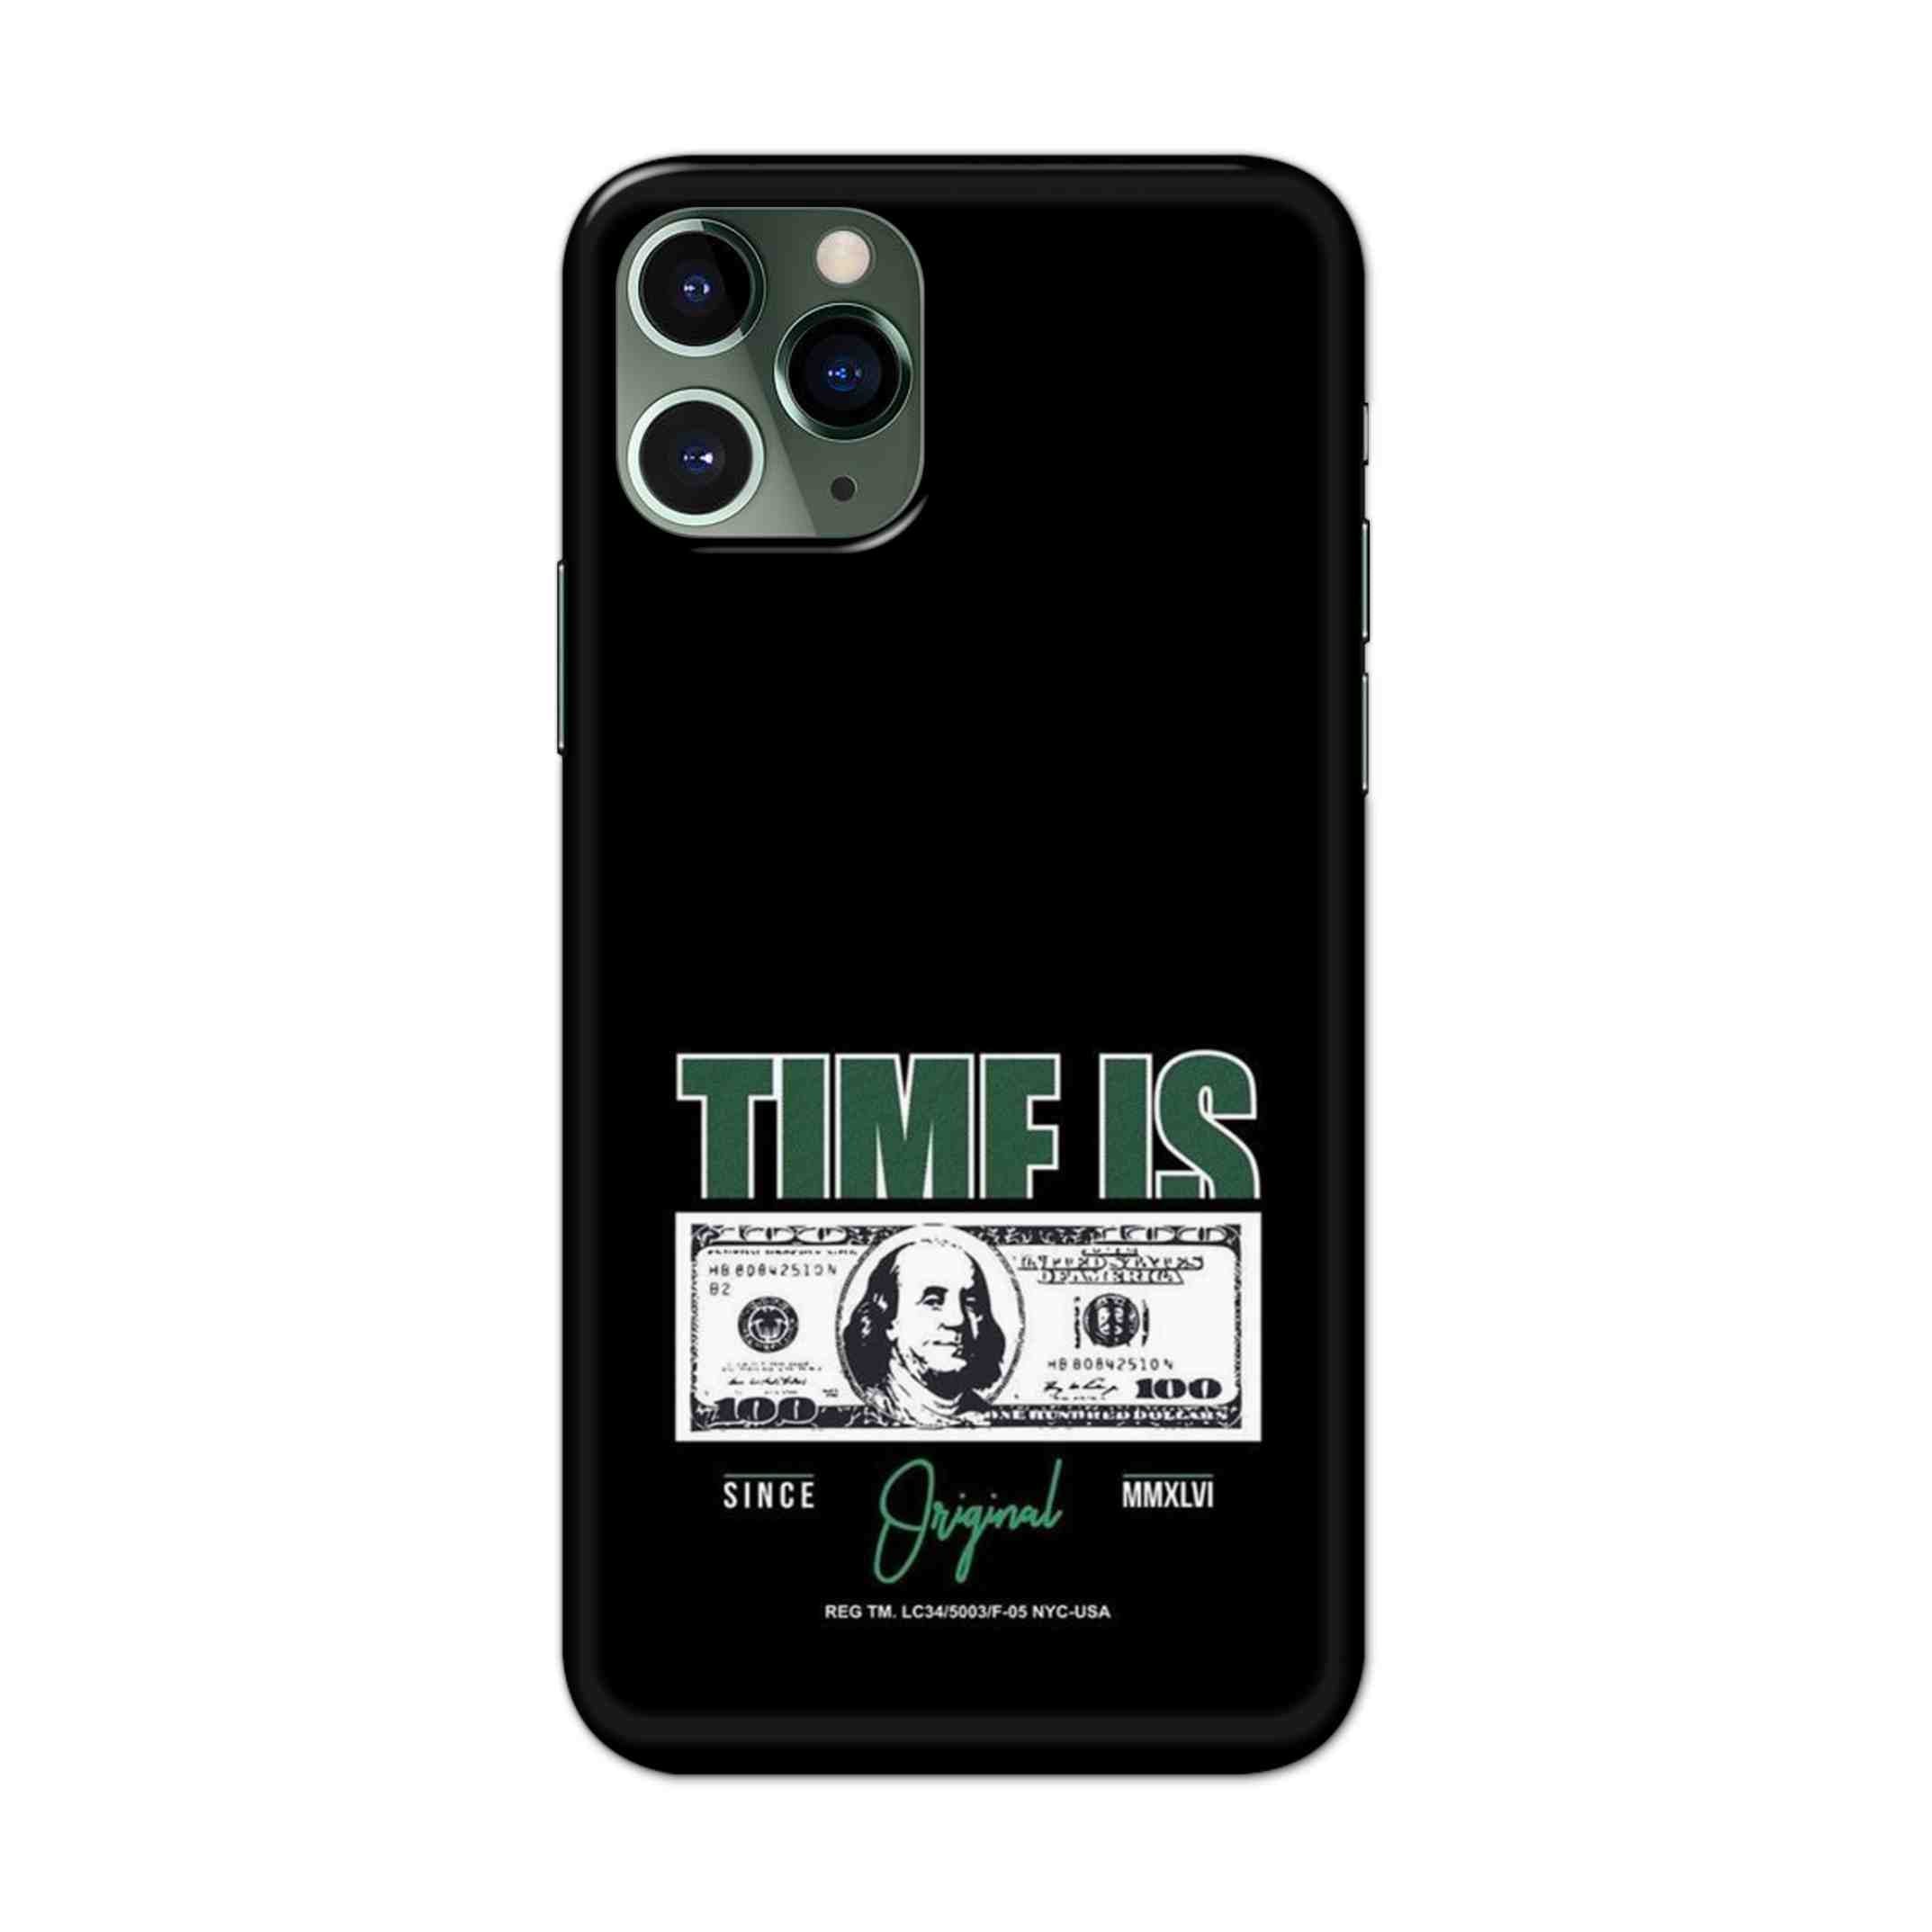 Buy Time Is Money Hard Back Mobile Phone Case/Cover For iPhone 11 Pro Online